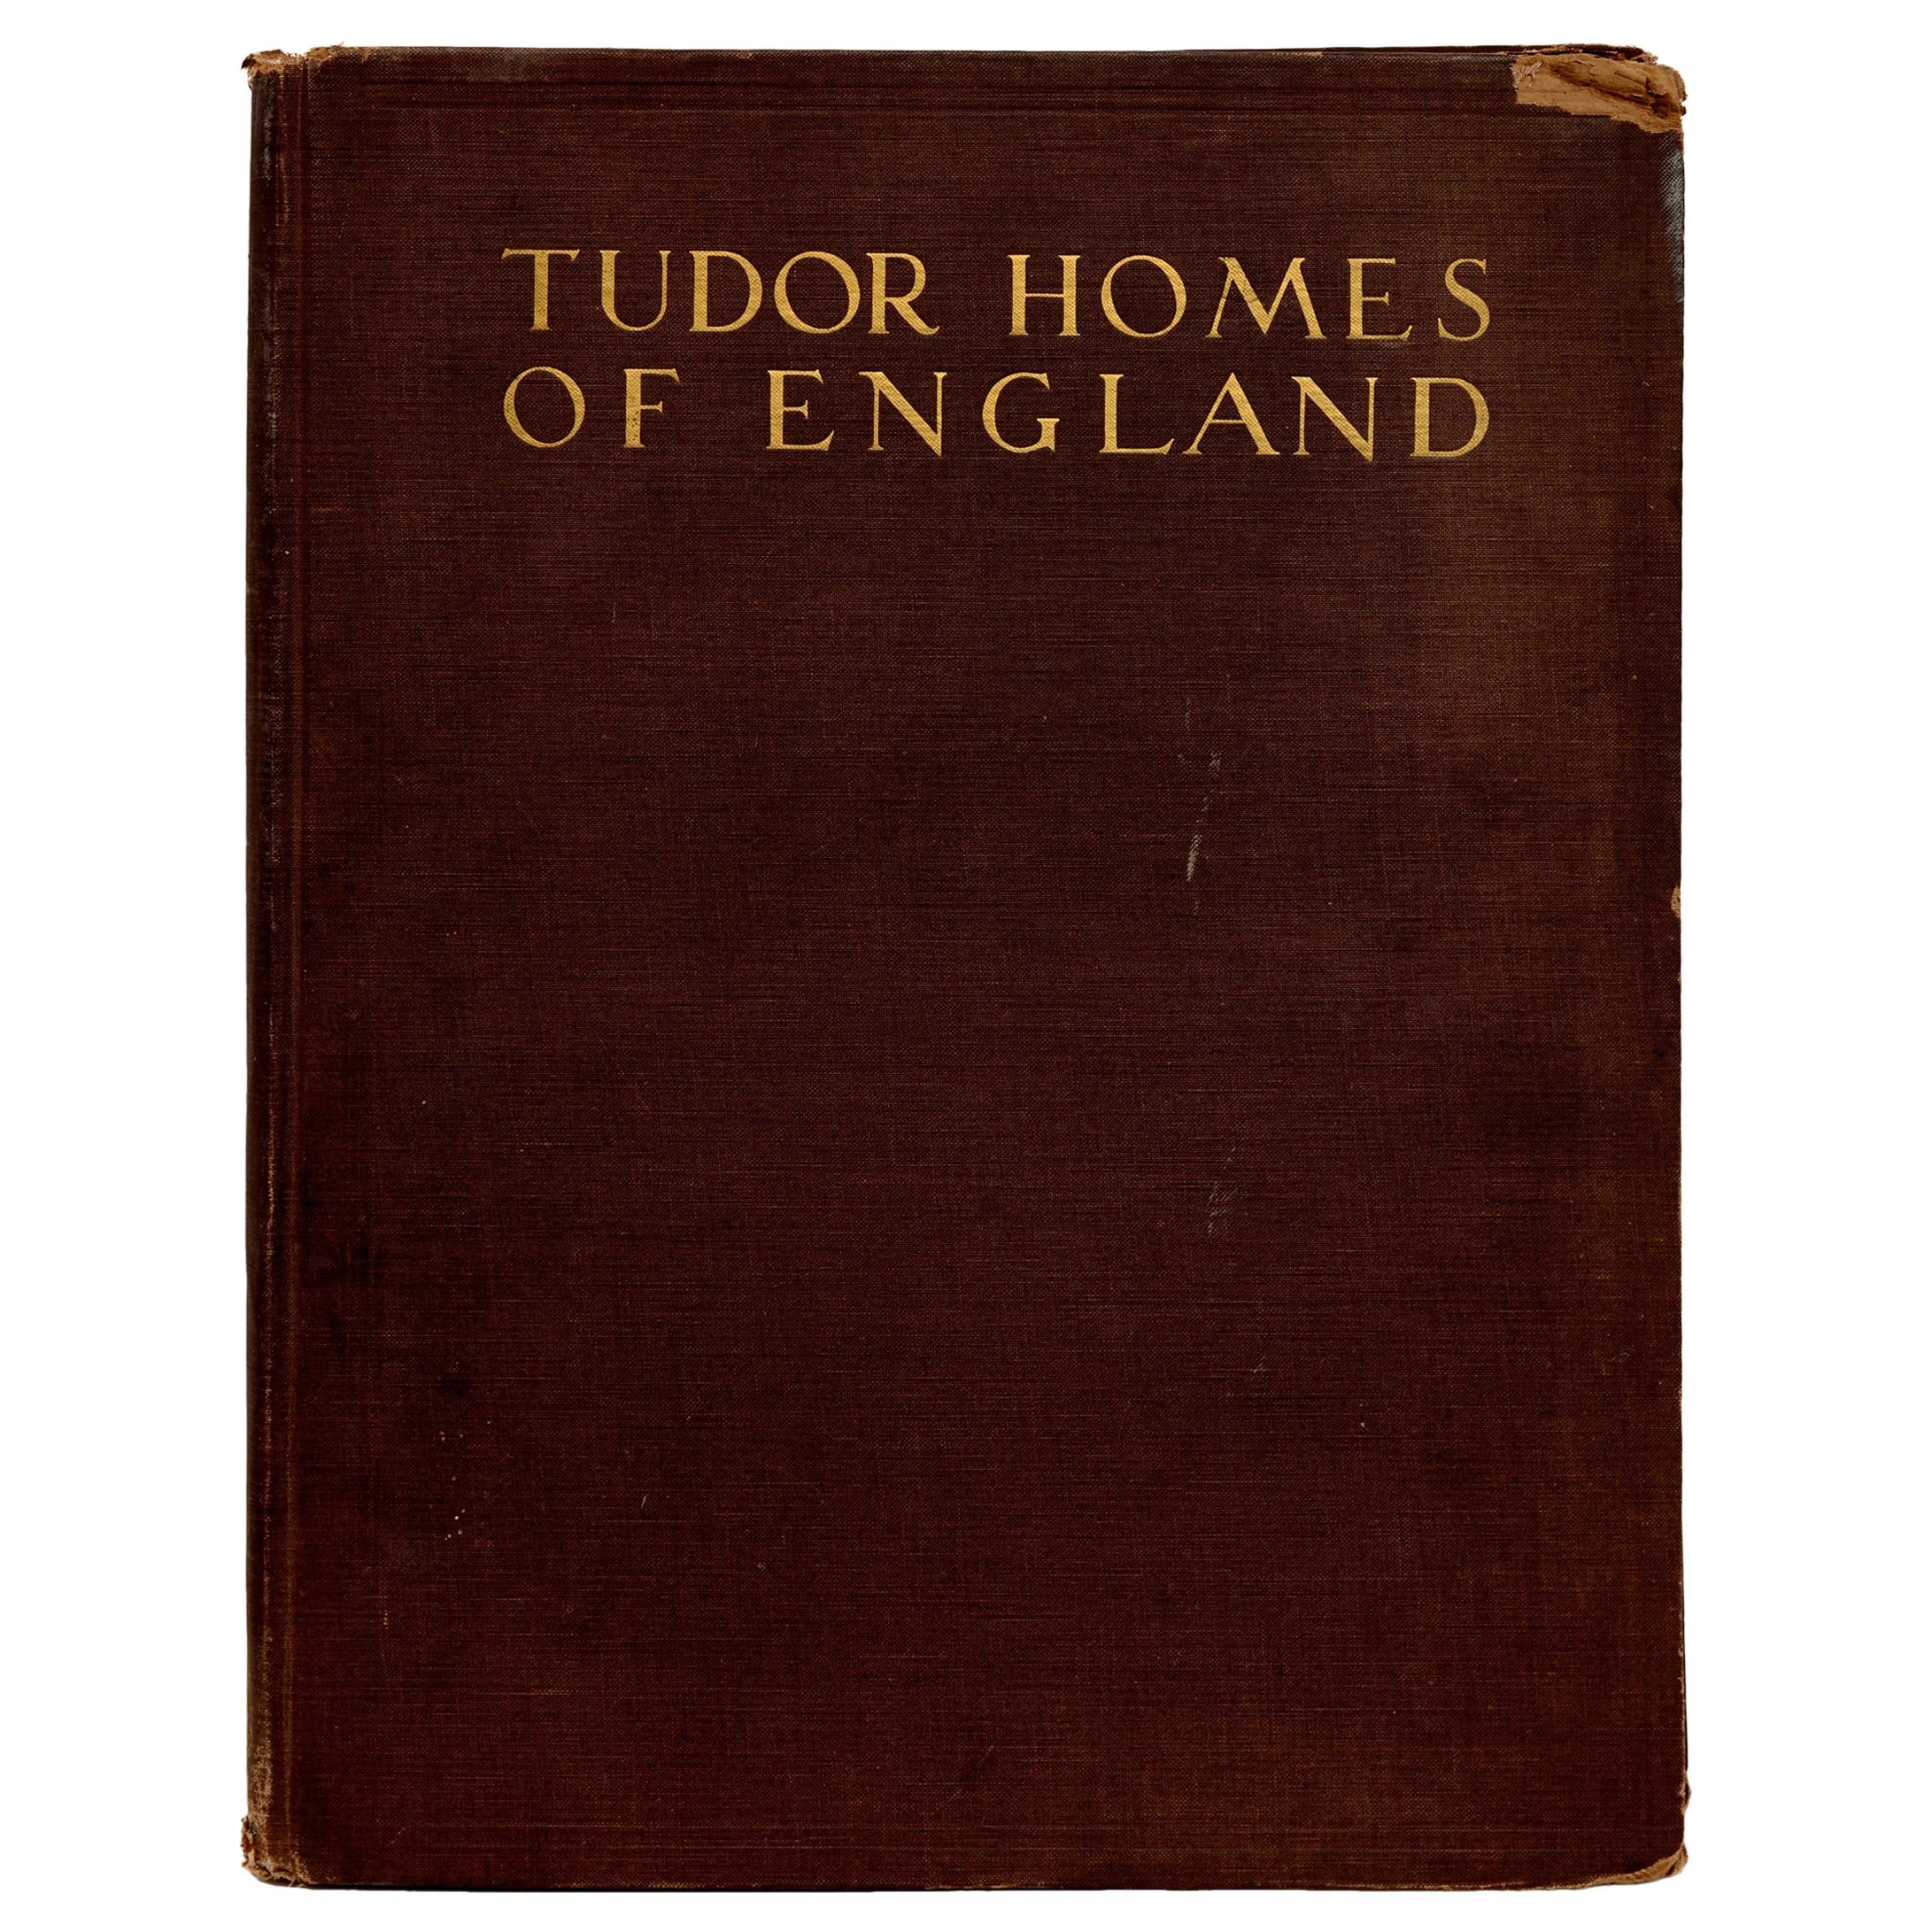 Tudor Homes of England with Some Examples from Later Periods, First Edition